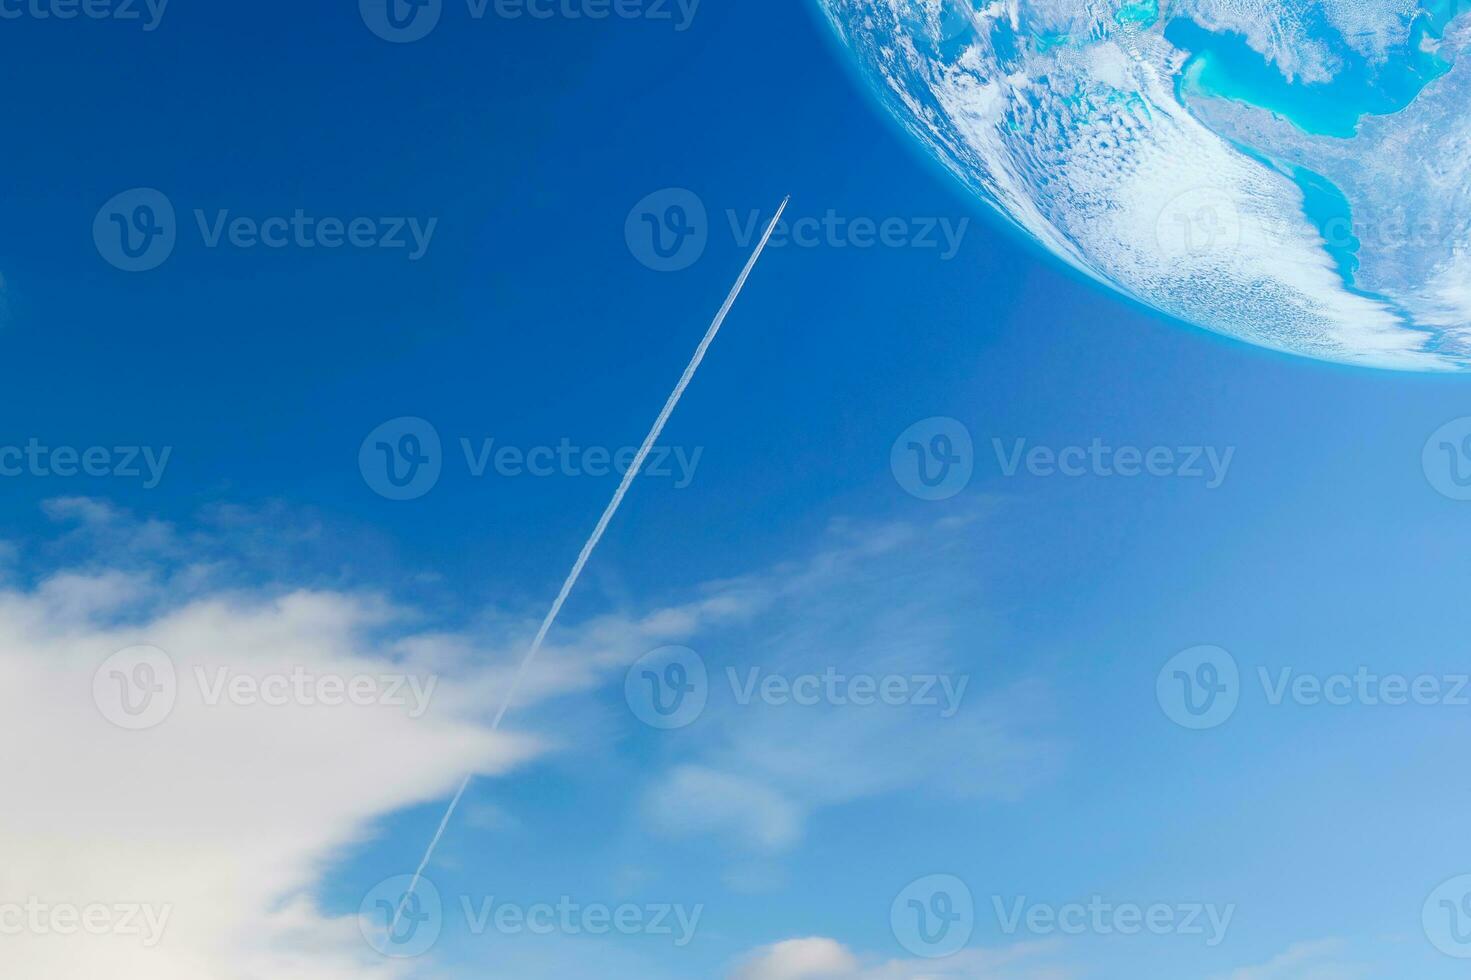 A private jet plane flying with contrail or vapor trails heading to the planet on blue sky photo